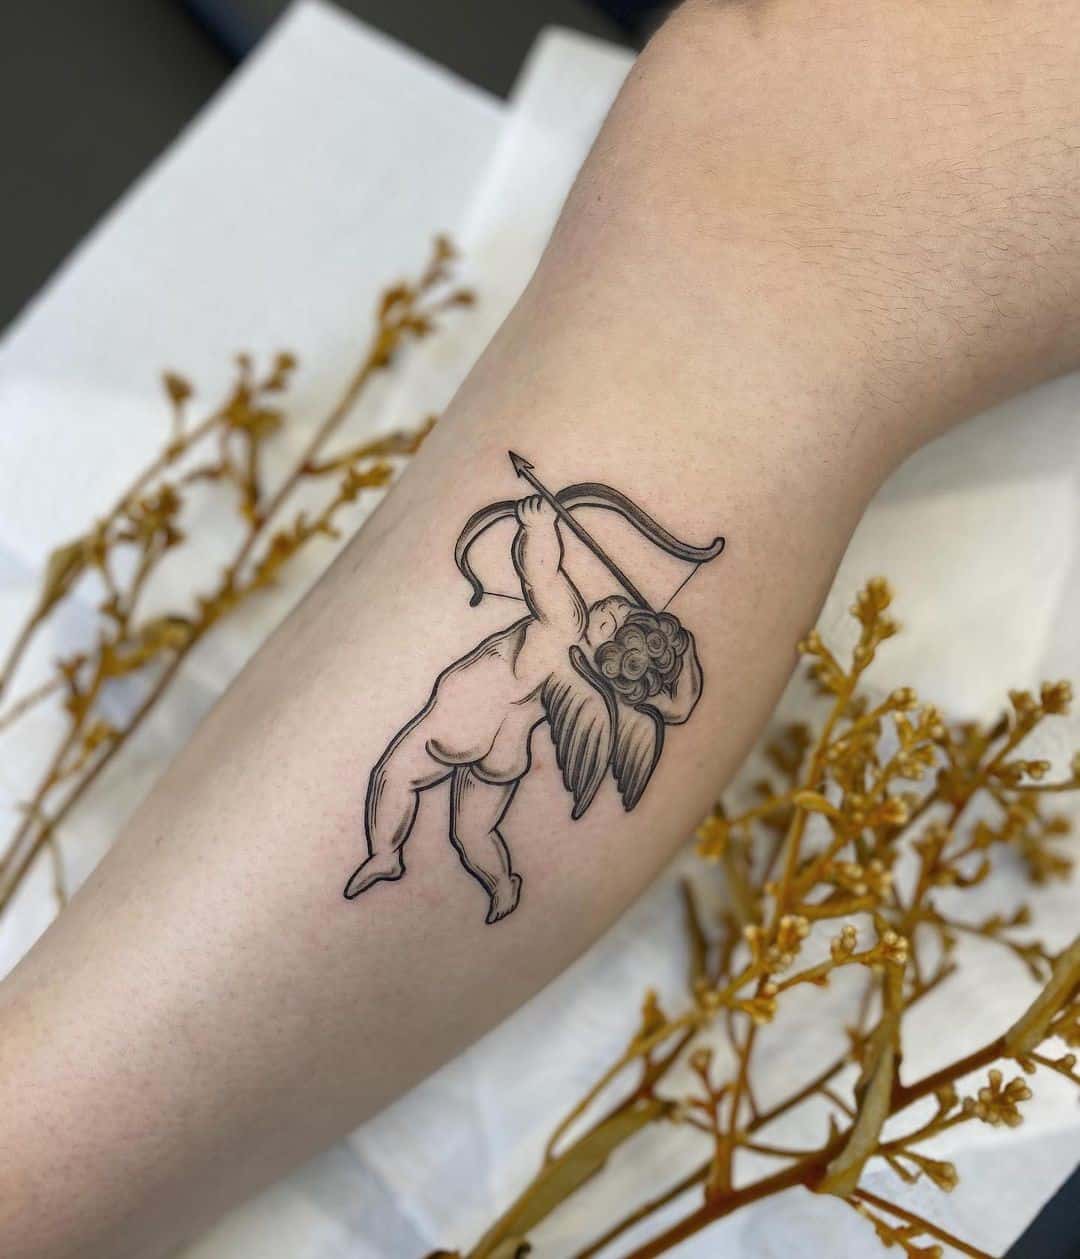 Cupid tattoo meaning